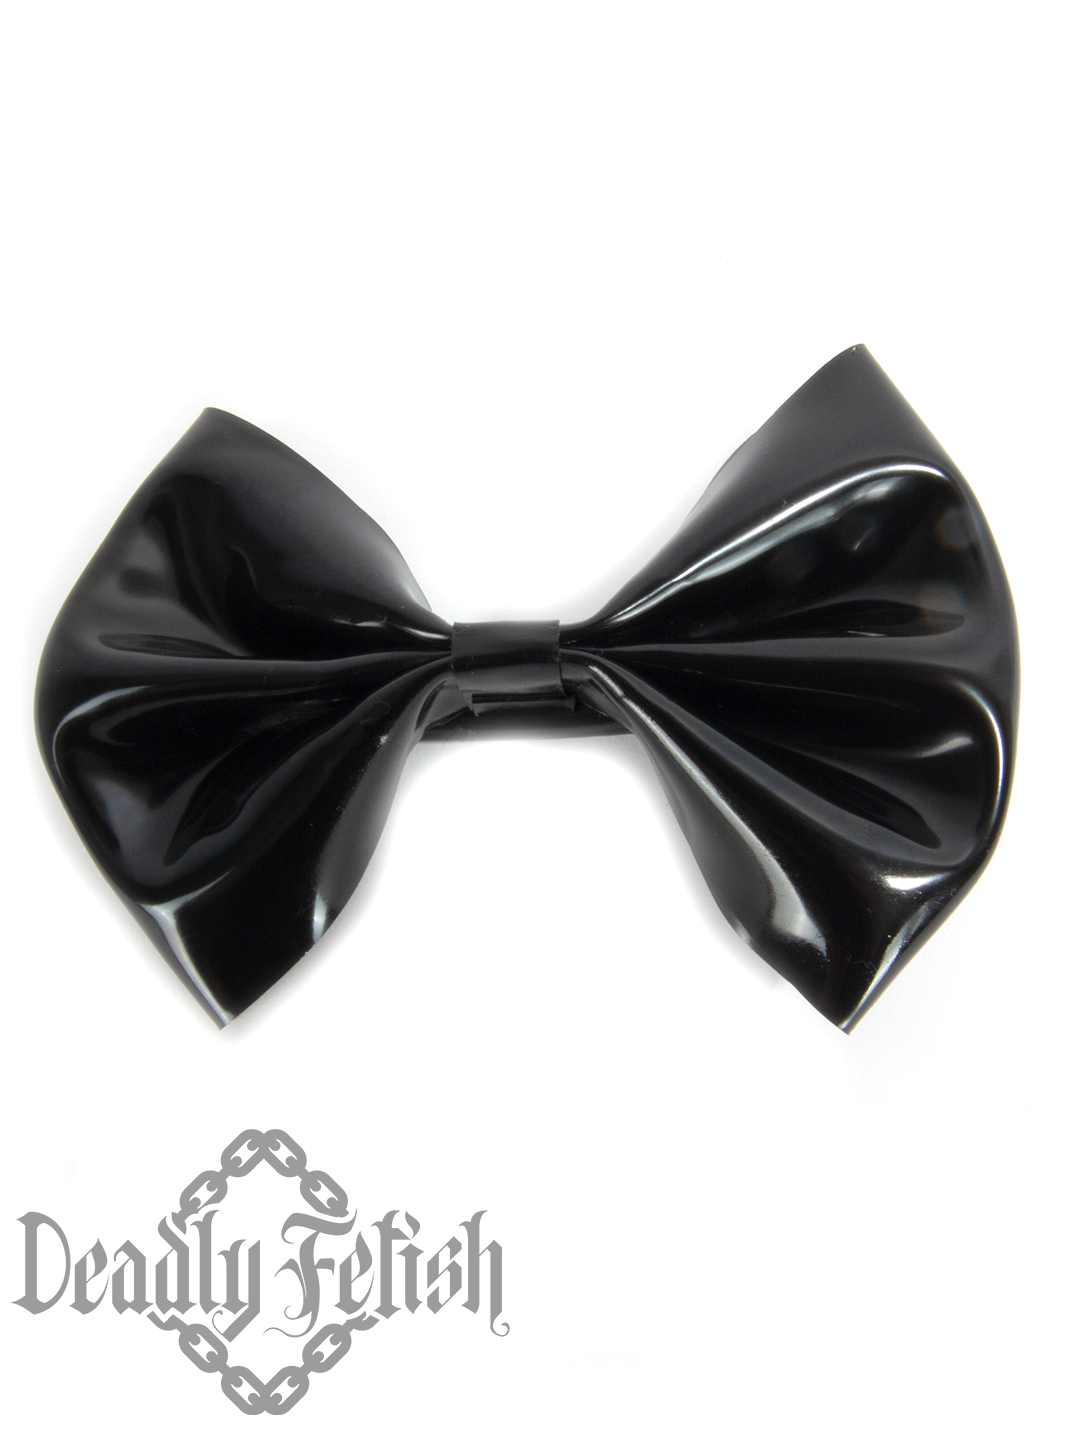 Deadly Fetish Latex: Bow Clips